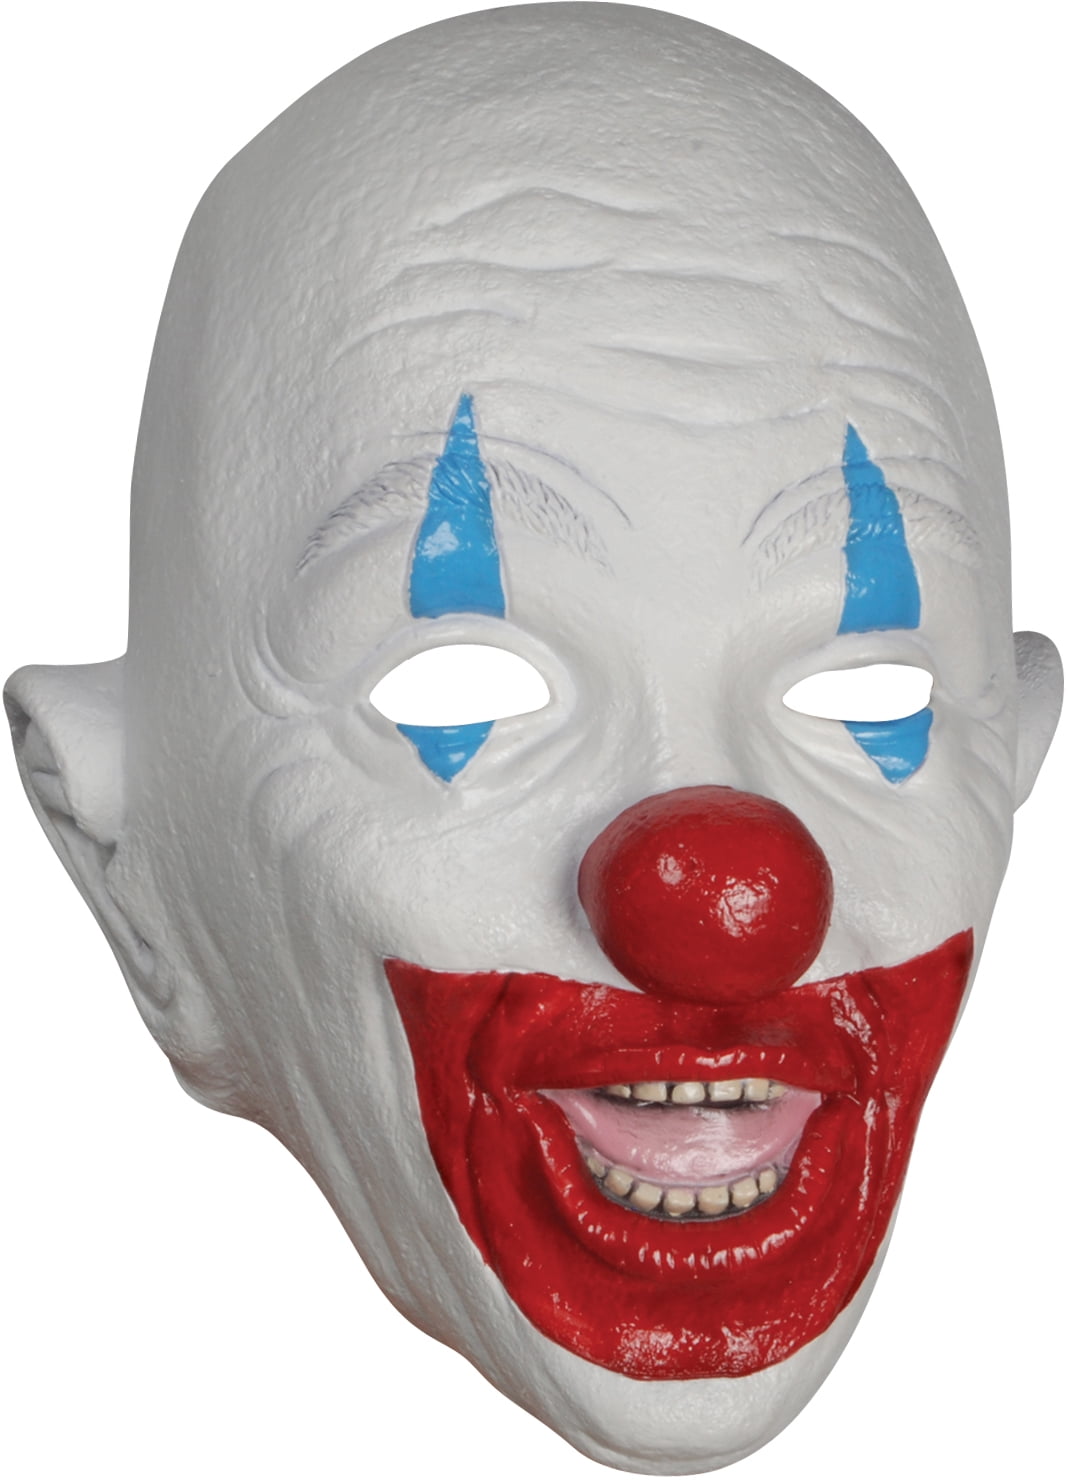 Star Power Adult Bald Creepy Clown Latex Mask, White Blue Red, One Size ...